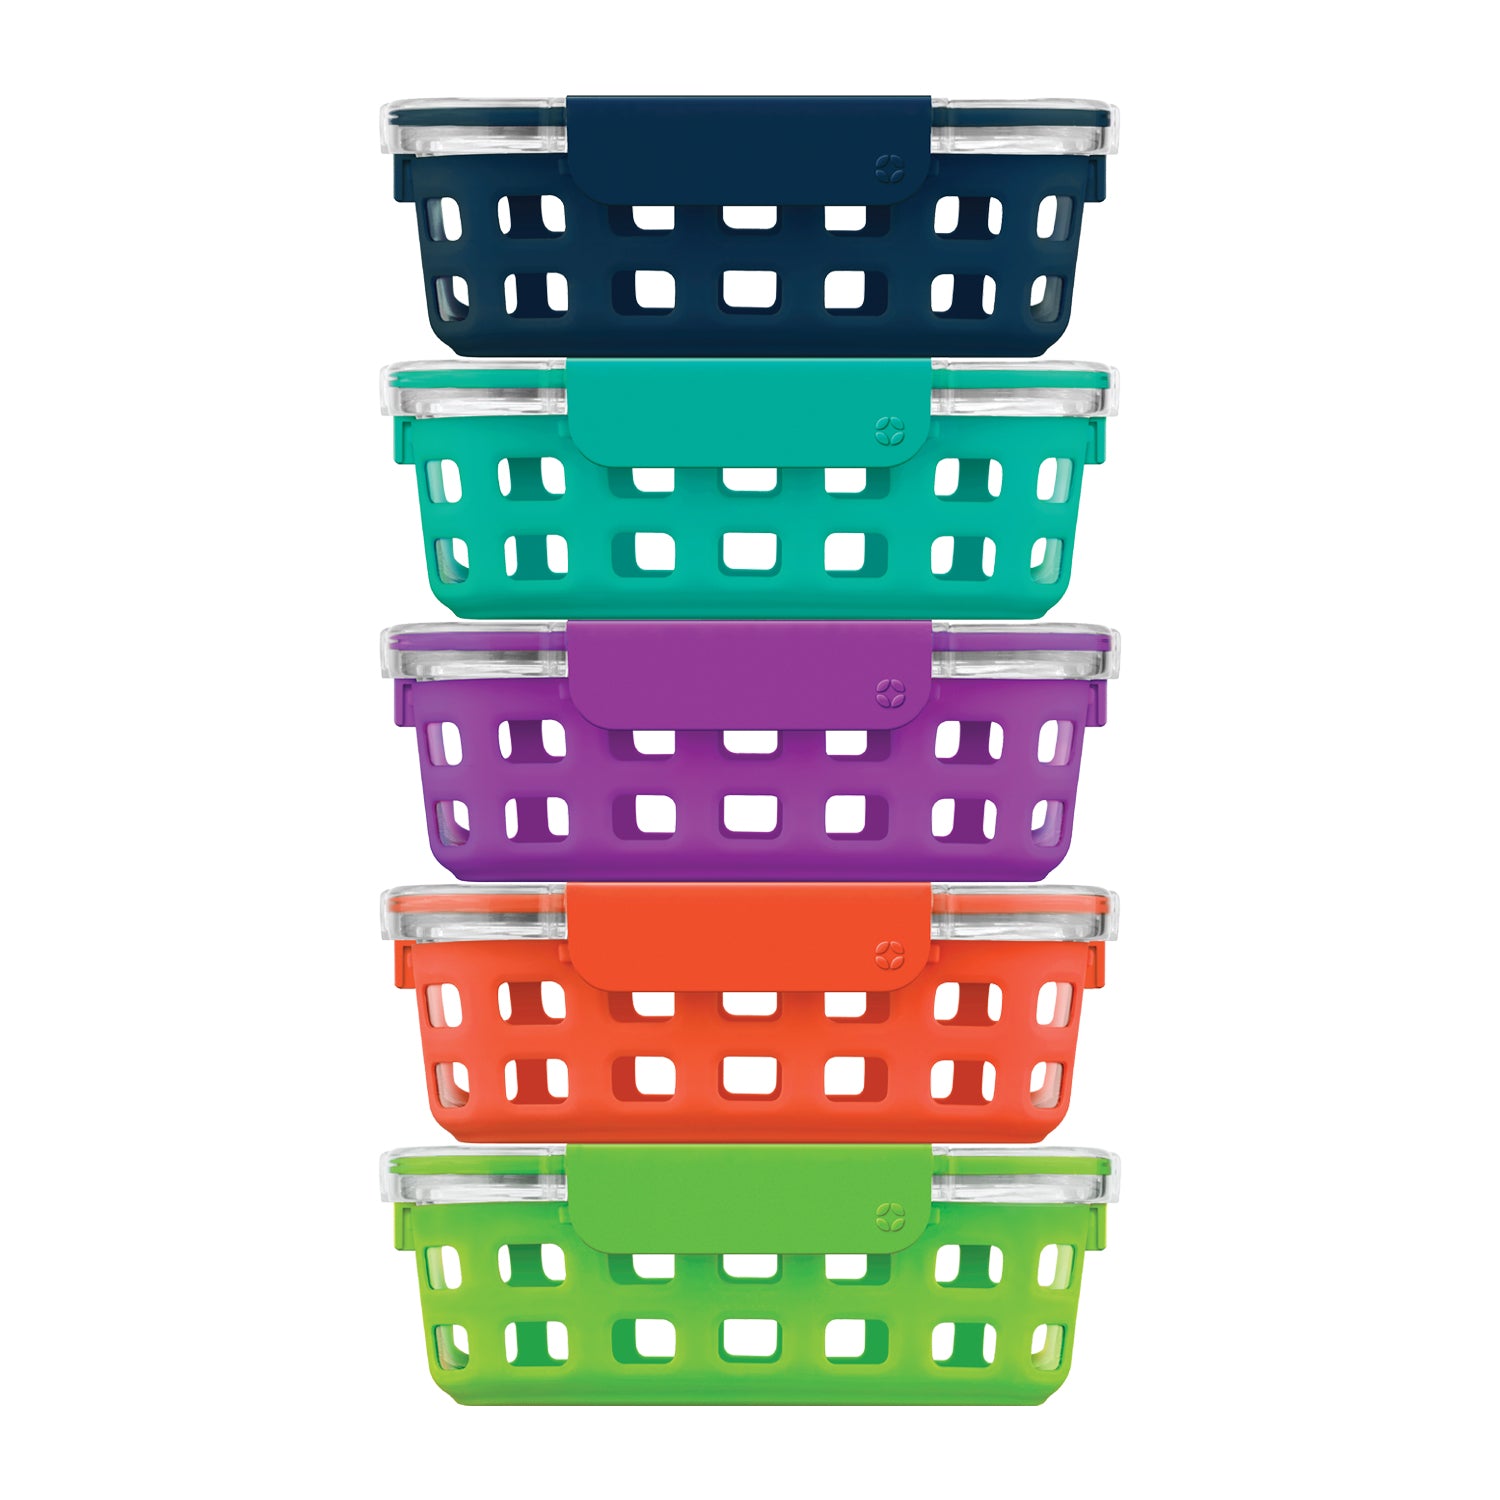 Glad Entrée Food Storage Containers, 5-Pack